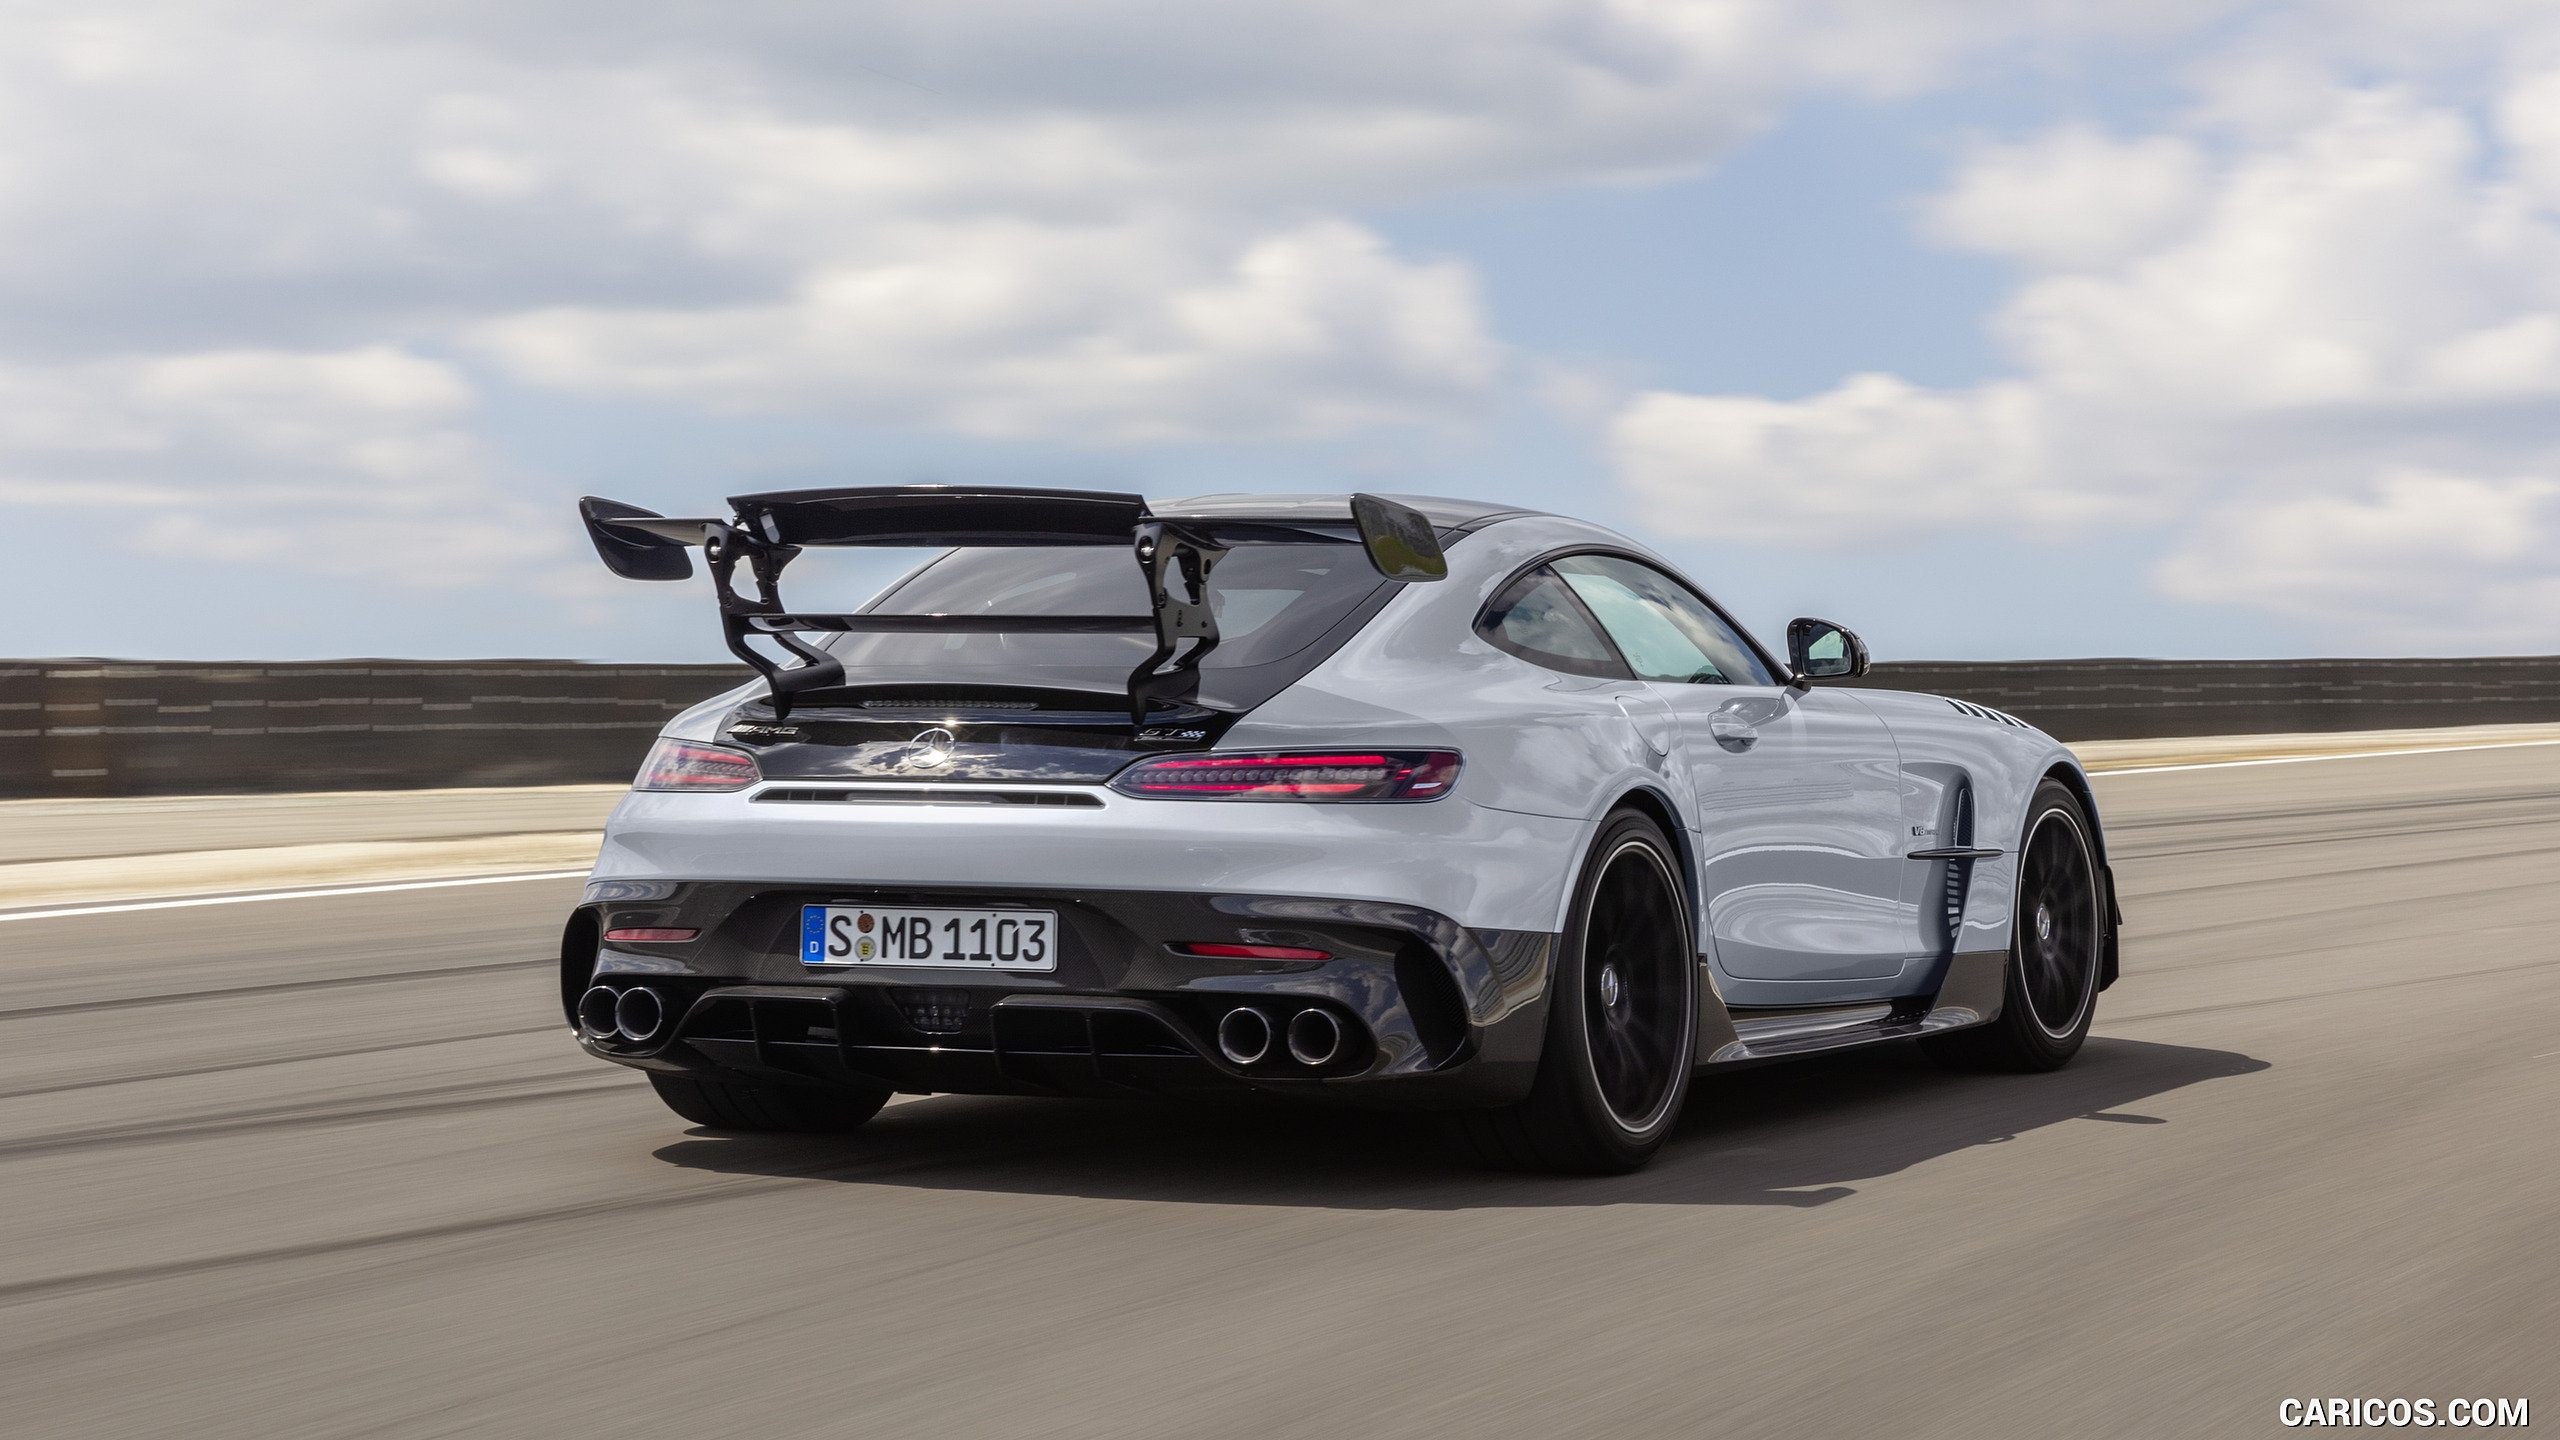 2021 Mercedes-AMG GT Black Series (Color: High Tech Silver) - Rear, #26 of 215